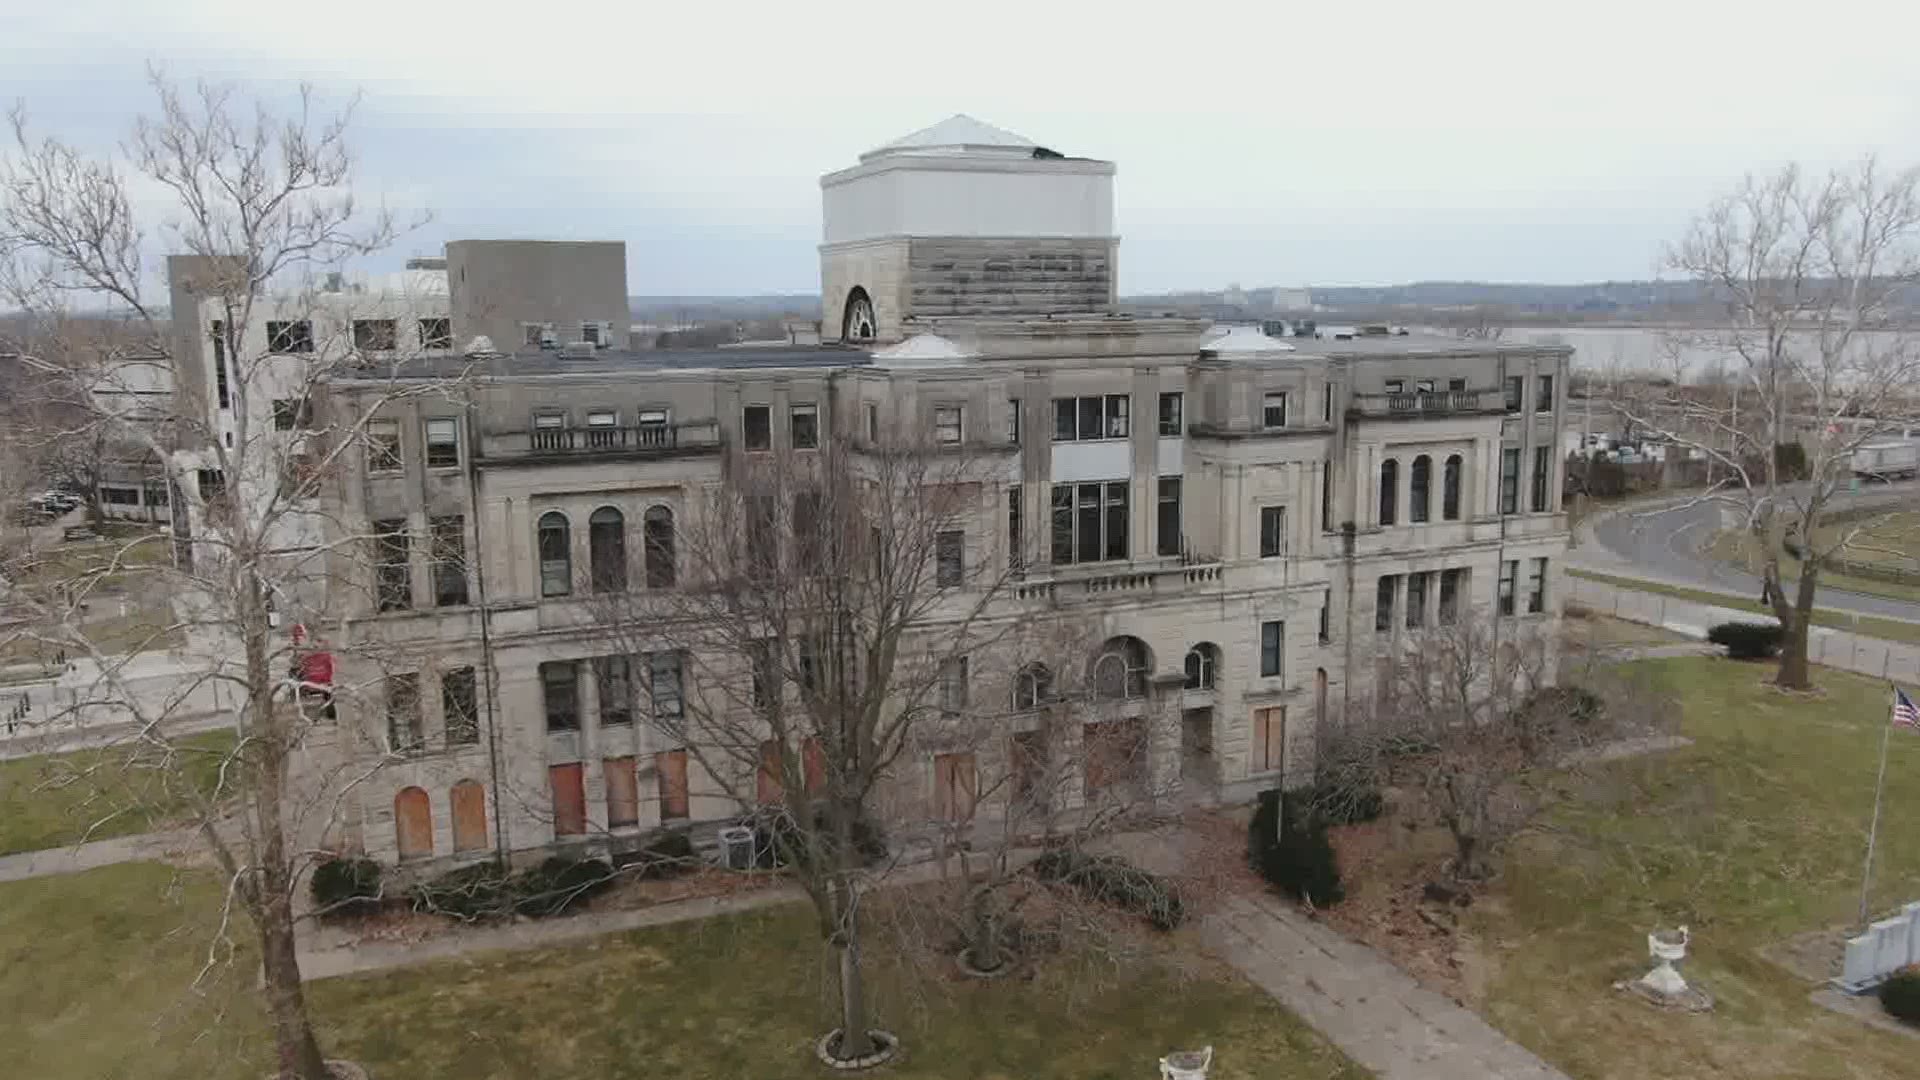 It's a years-long saga: What will happen to the old Rock Island County courthouse? The Rock Island County board heard public comments about the issue on Wednesday.